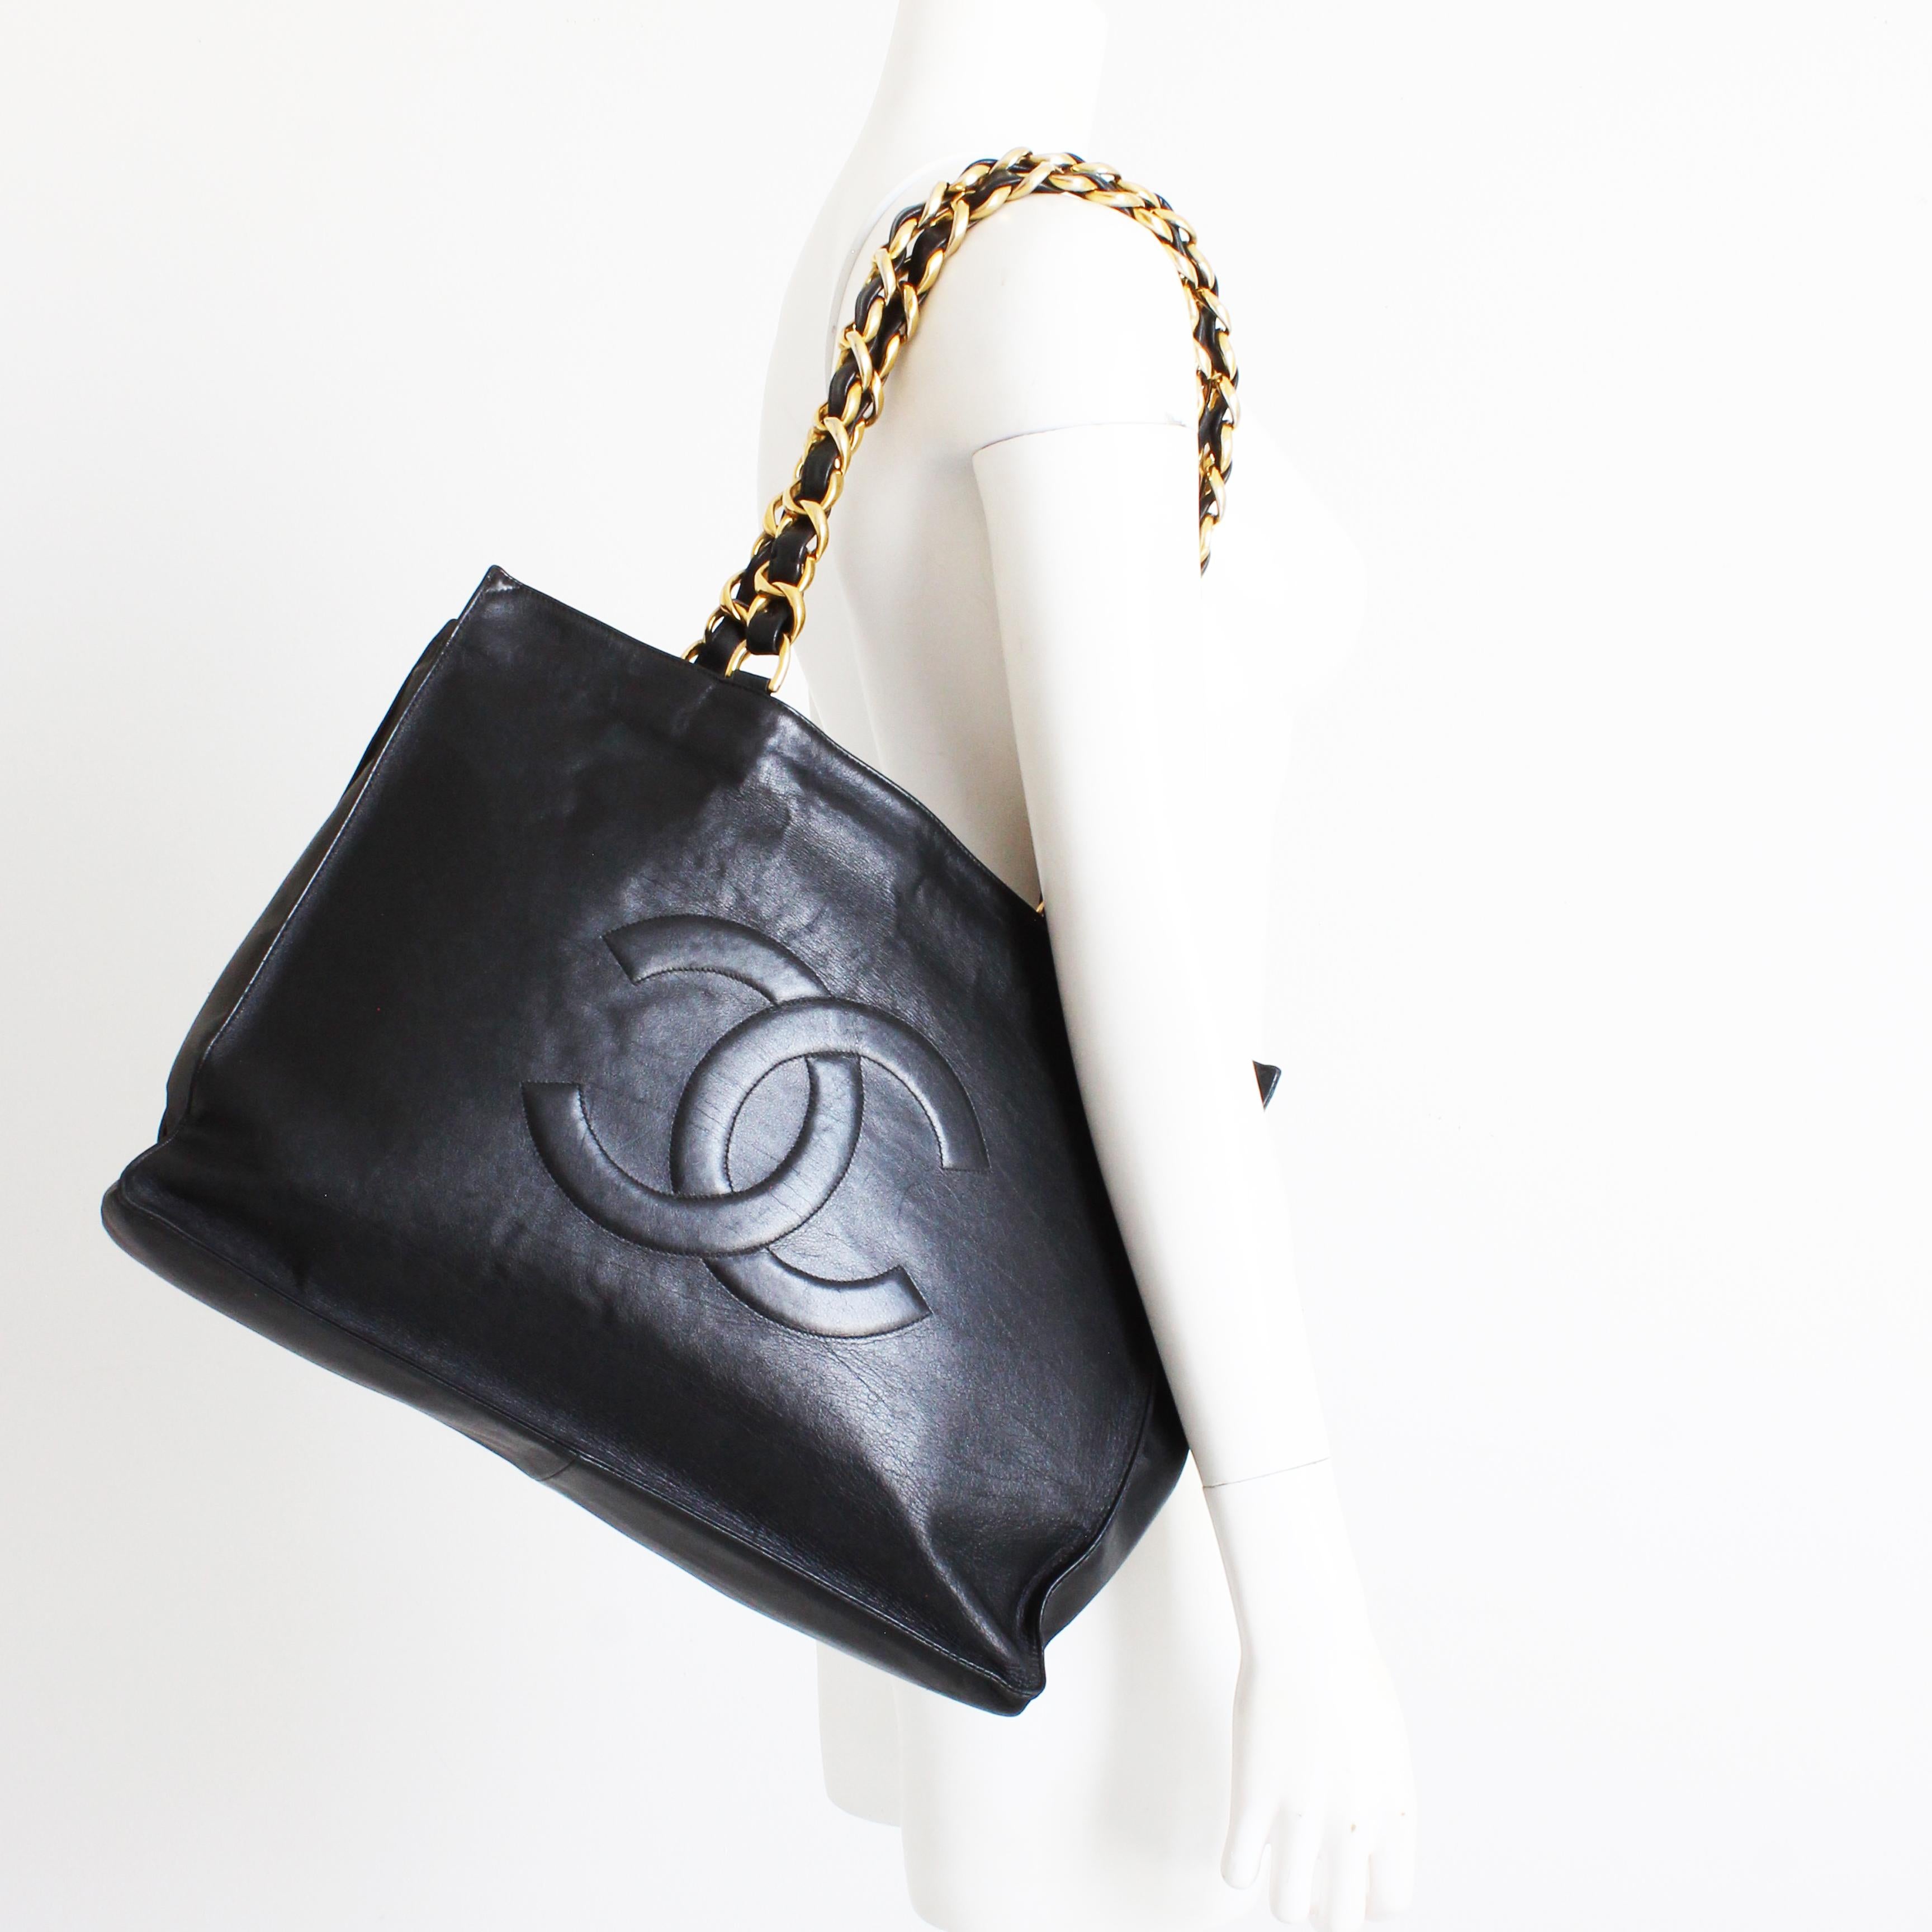 black tote bag with gold chain